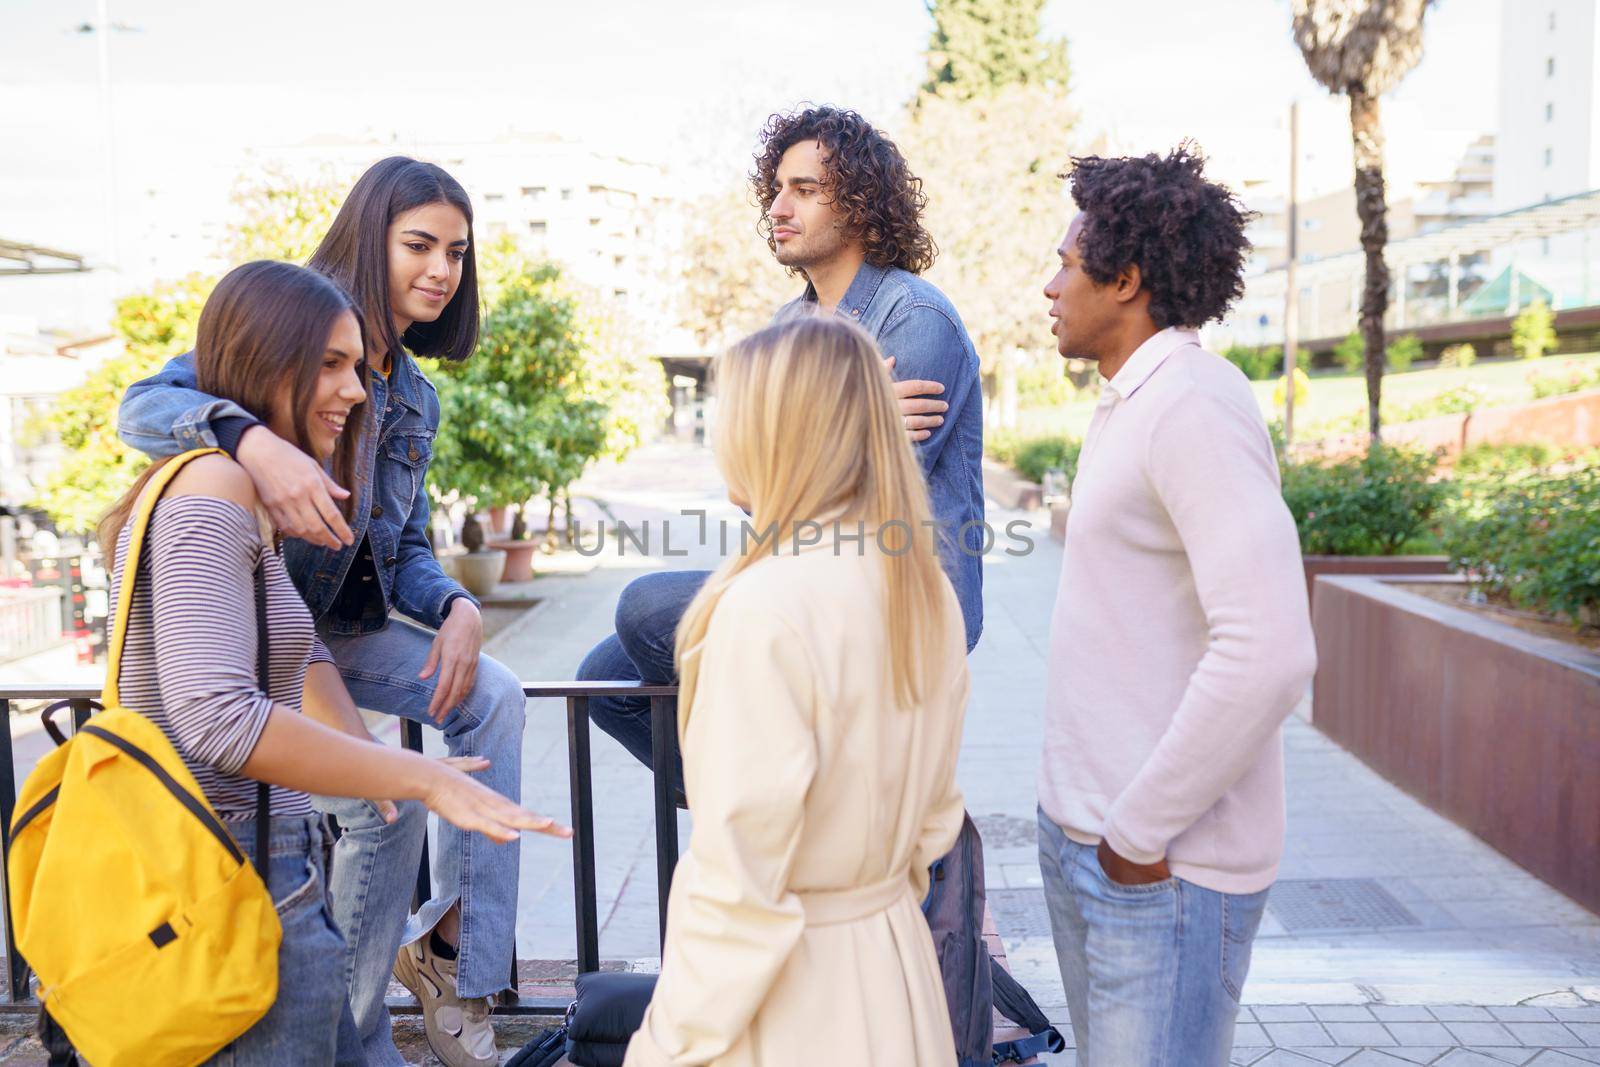 Multi-ethnic group of friends gathered in the street leaning on a railing. Young people having fun together.